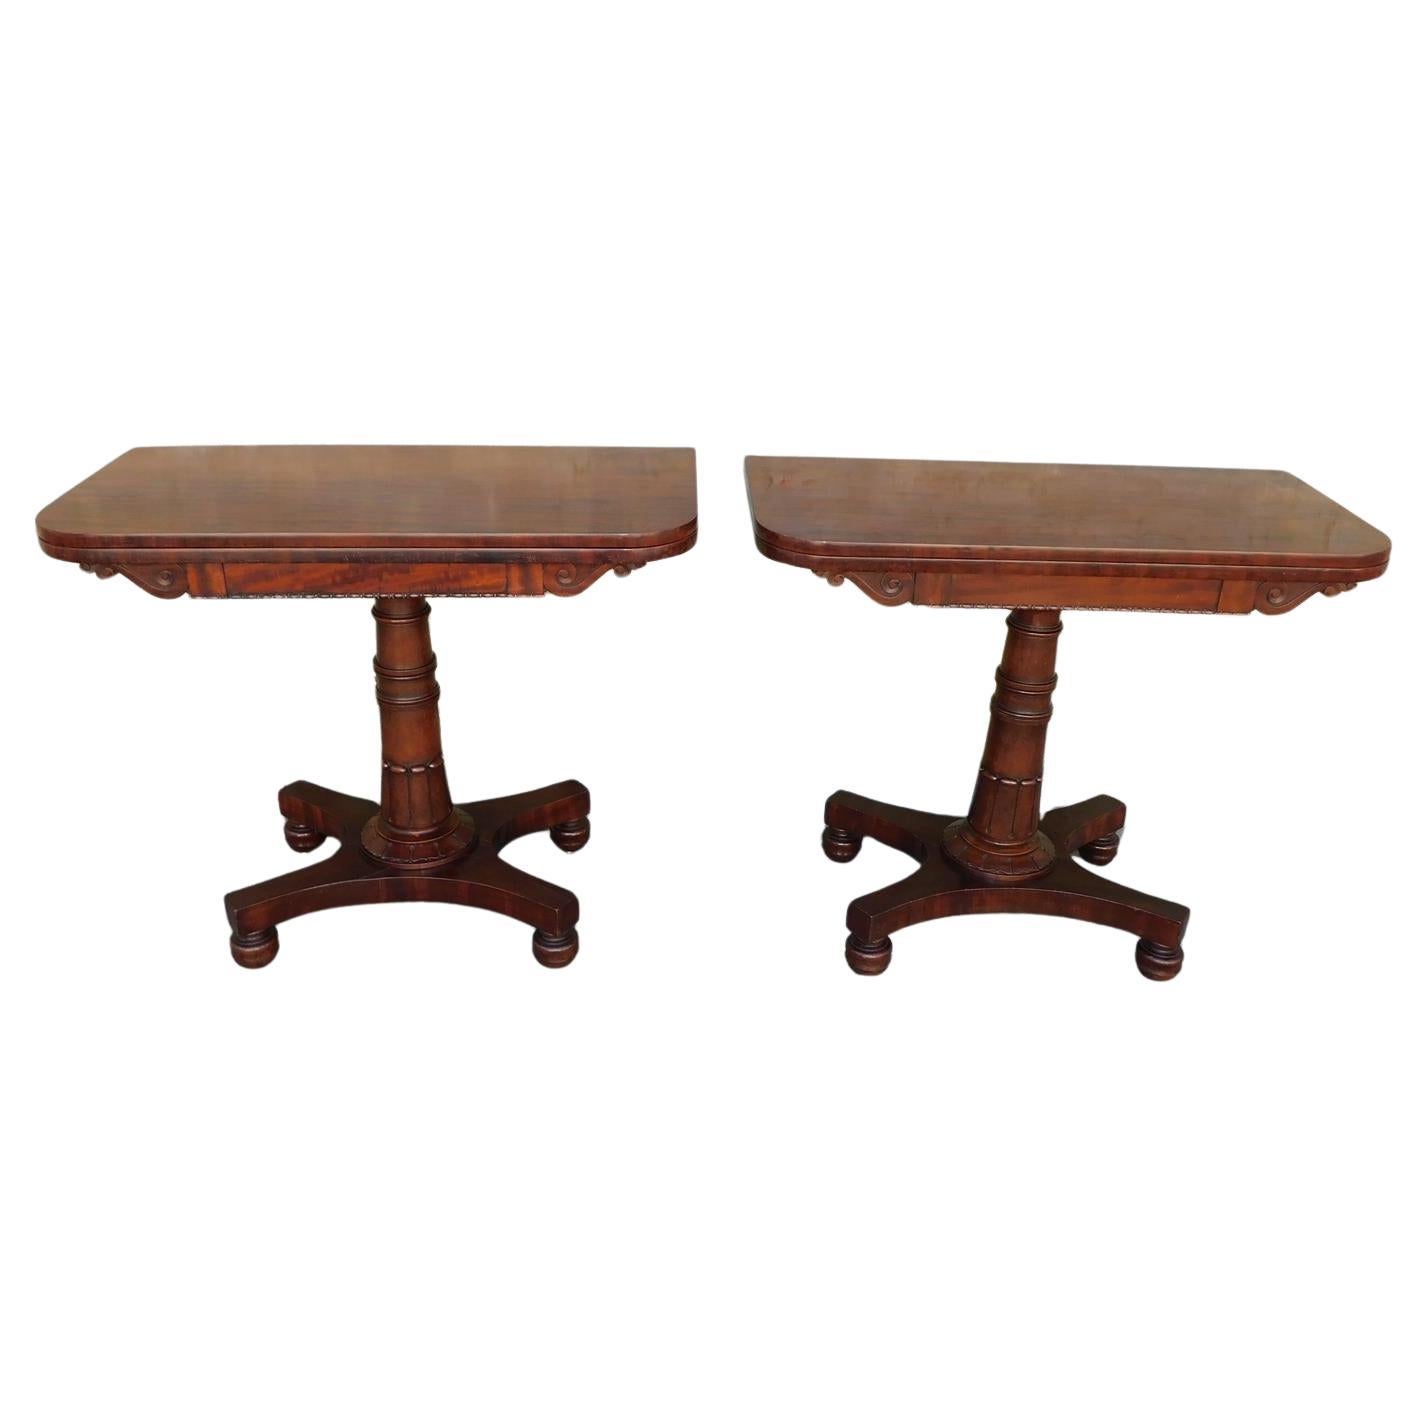 Pair of English Mahogany Pedestal Hinged Game Tables on Brass Casters, C. 1820 For Sale